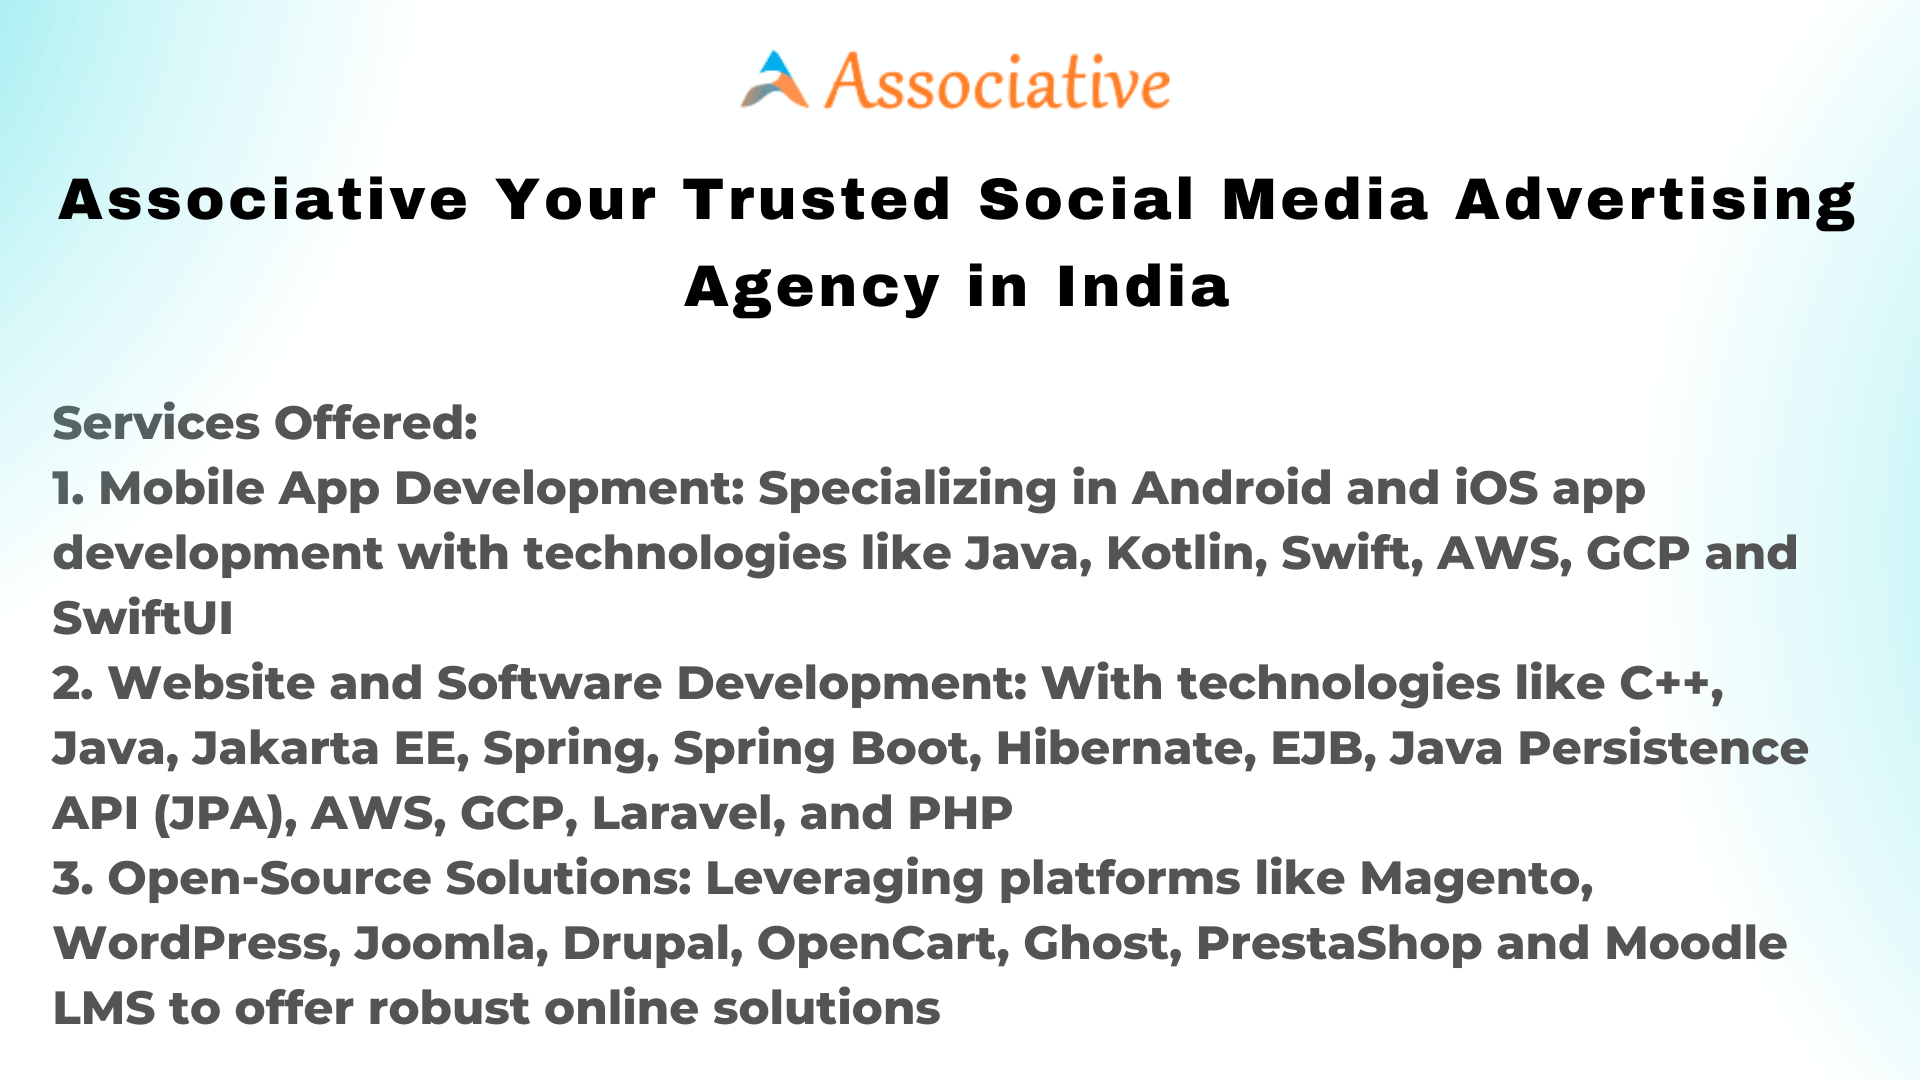 Associative Your Trusted Social Media Advertising Agency in India